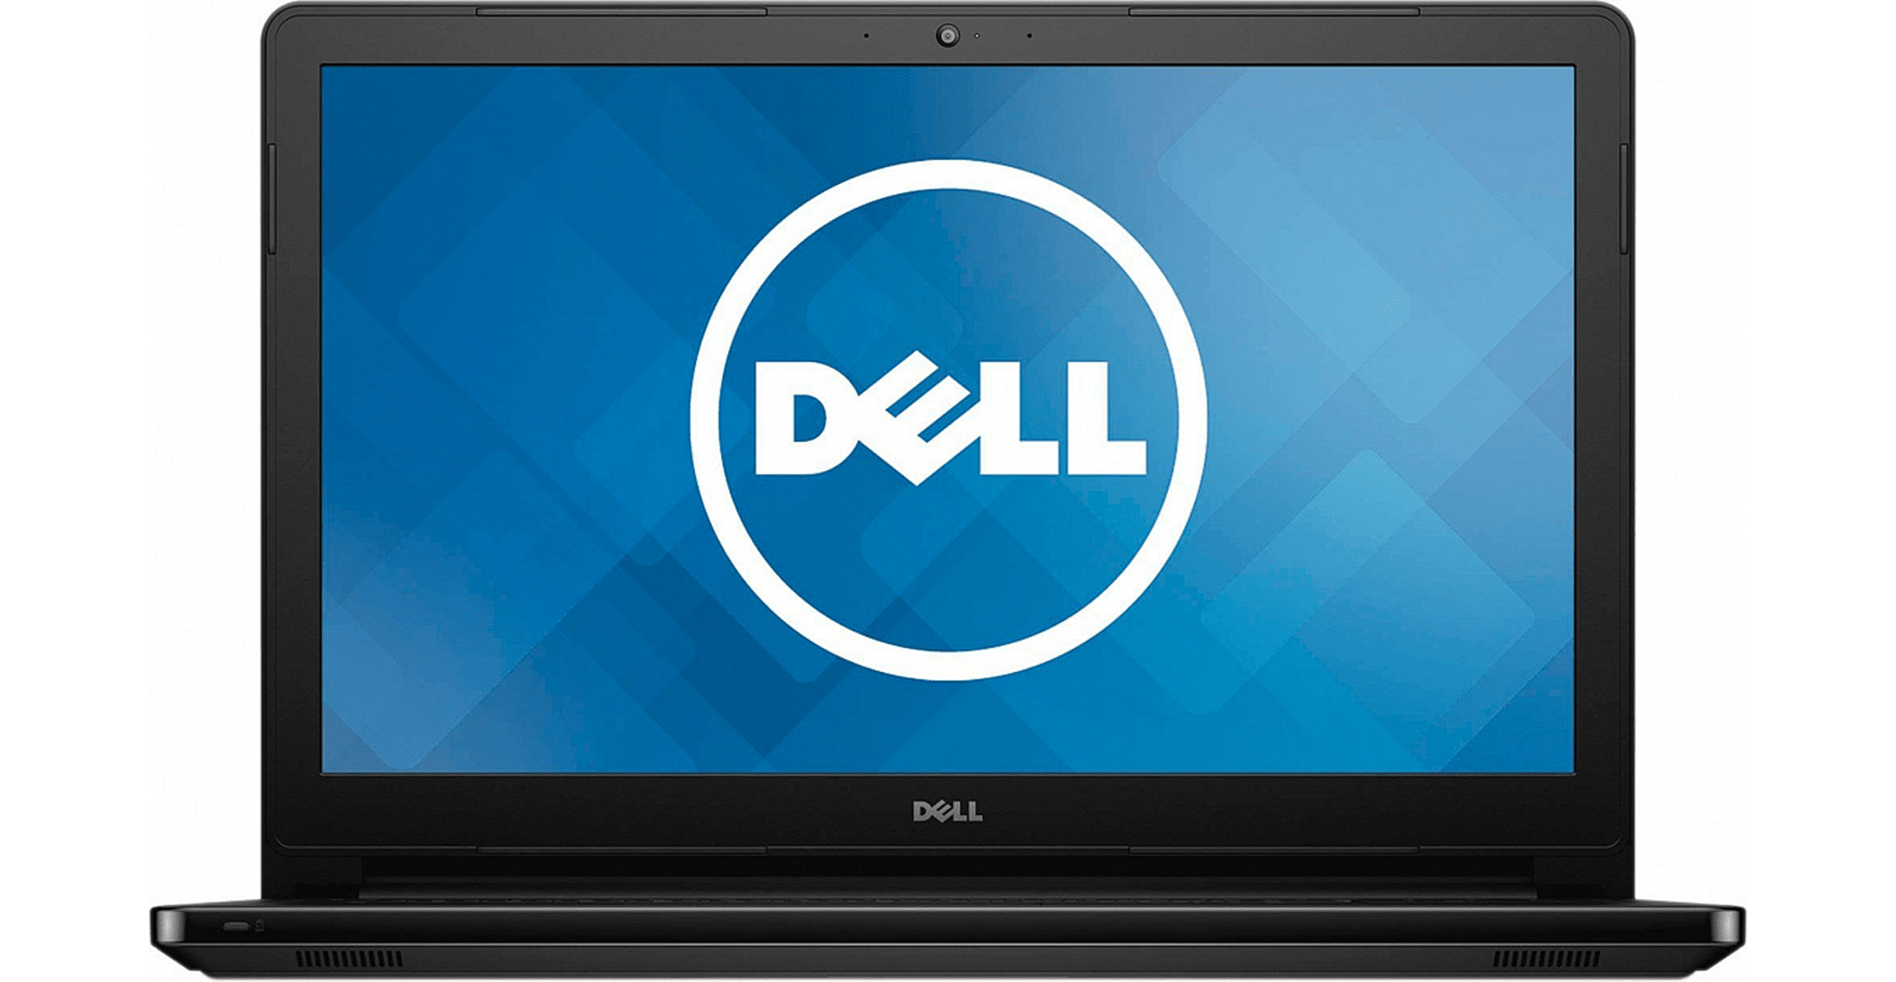 Dell Laptop Screen Repair Guide | Computer Troubleshooters